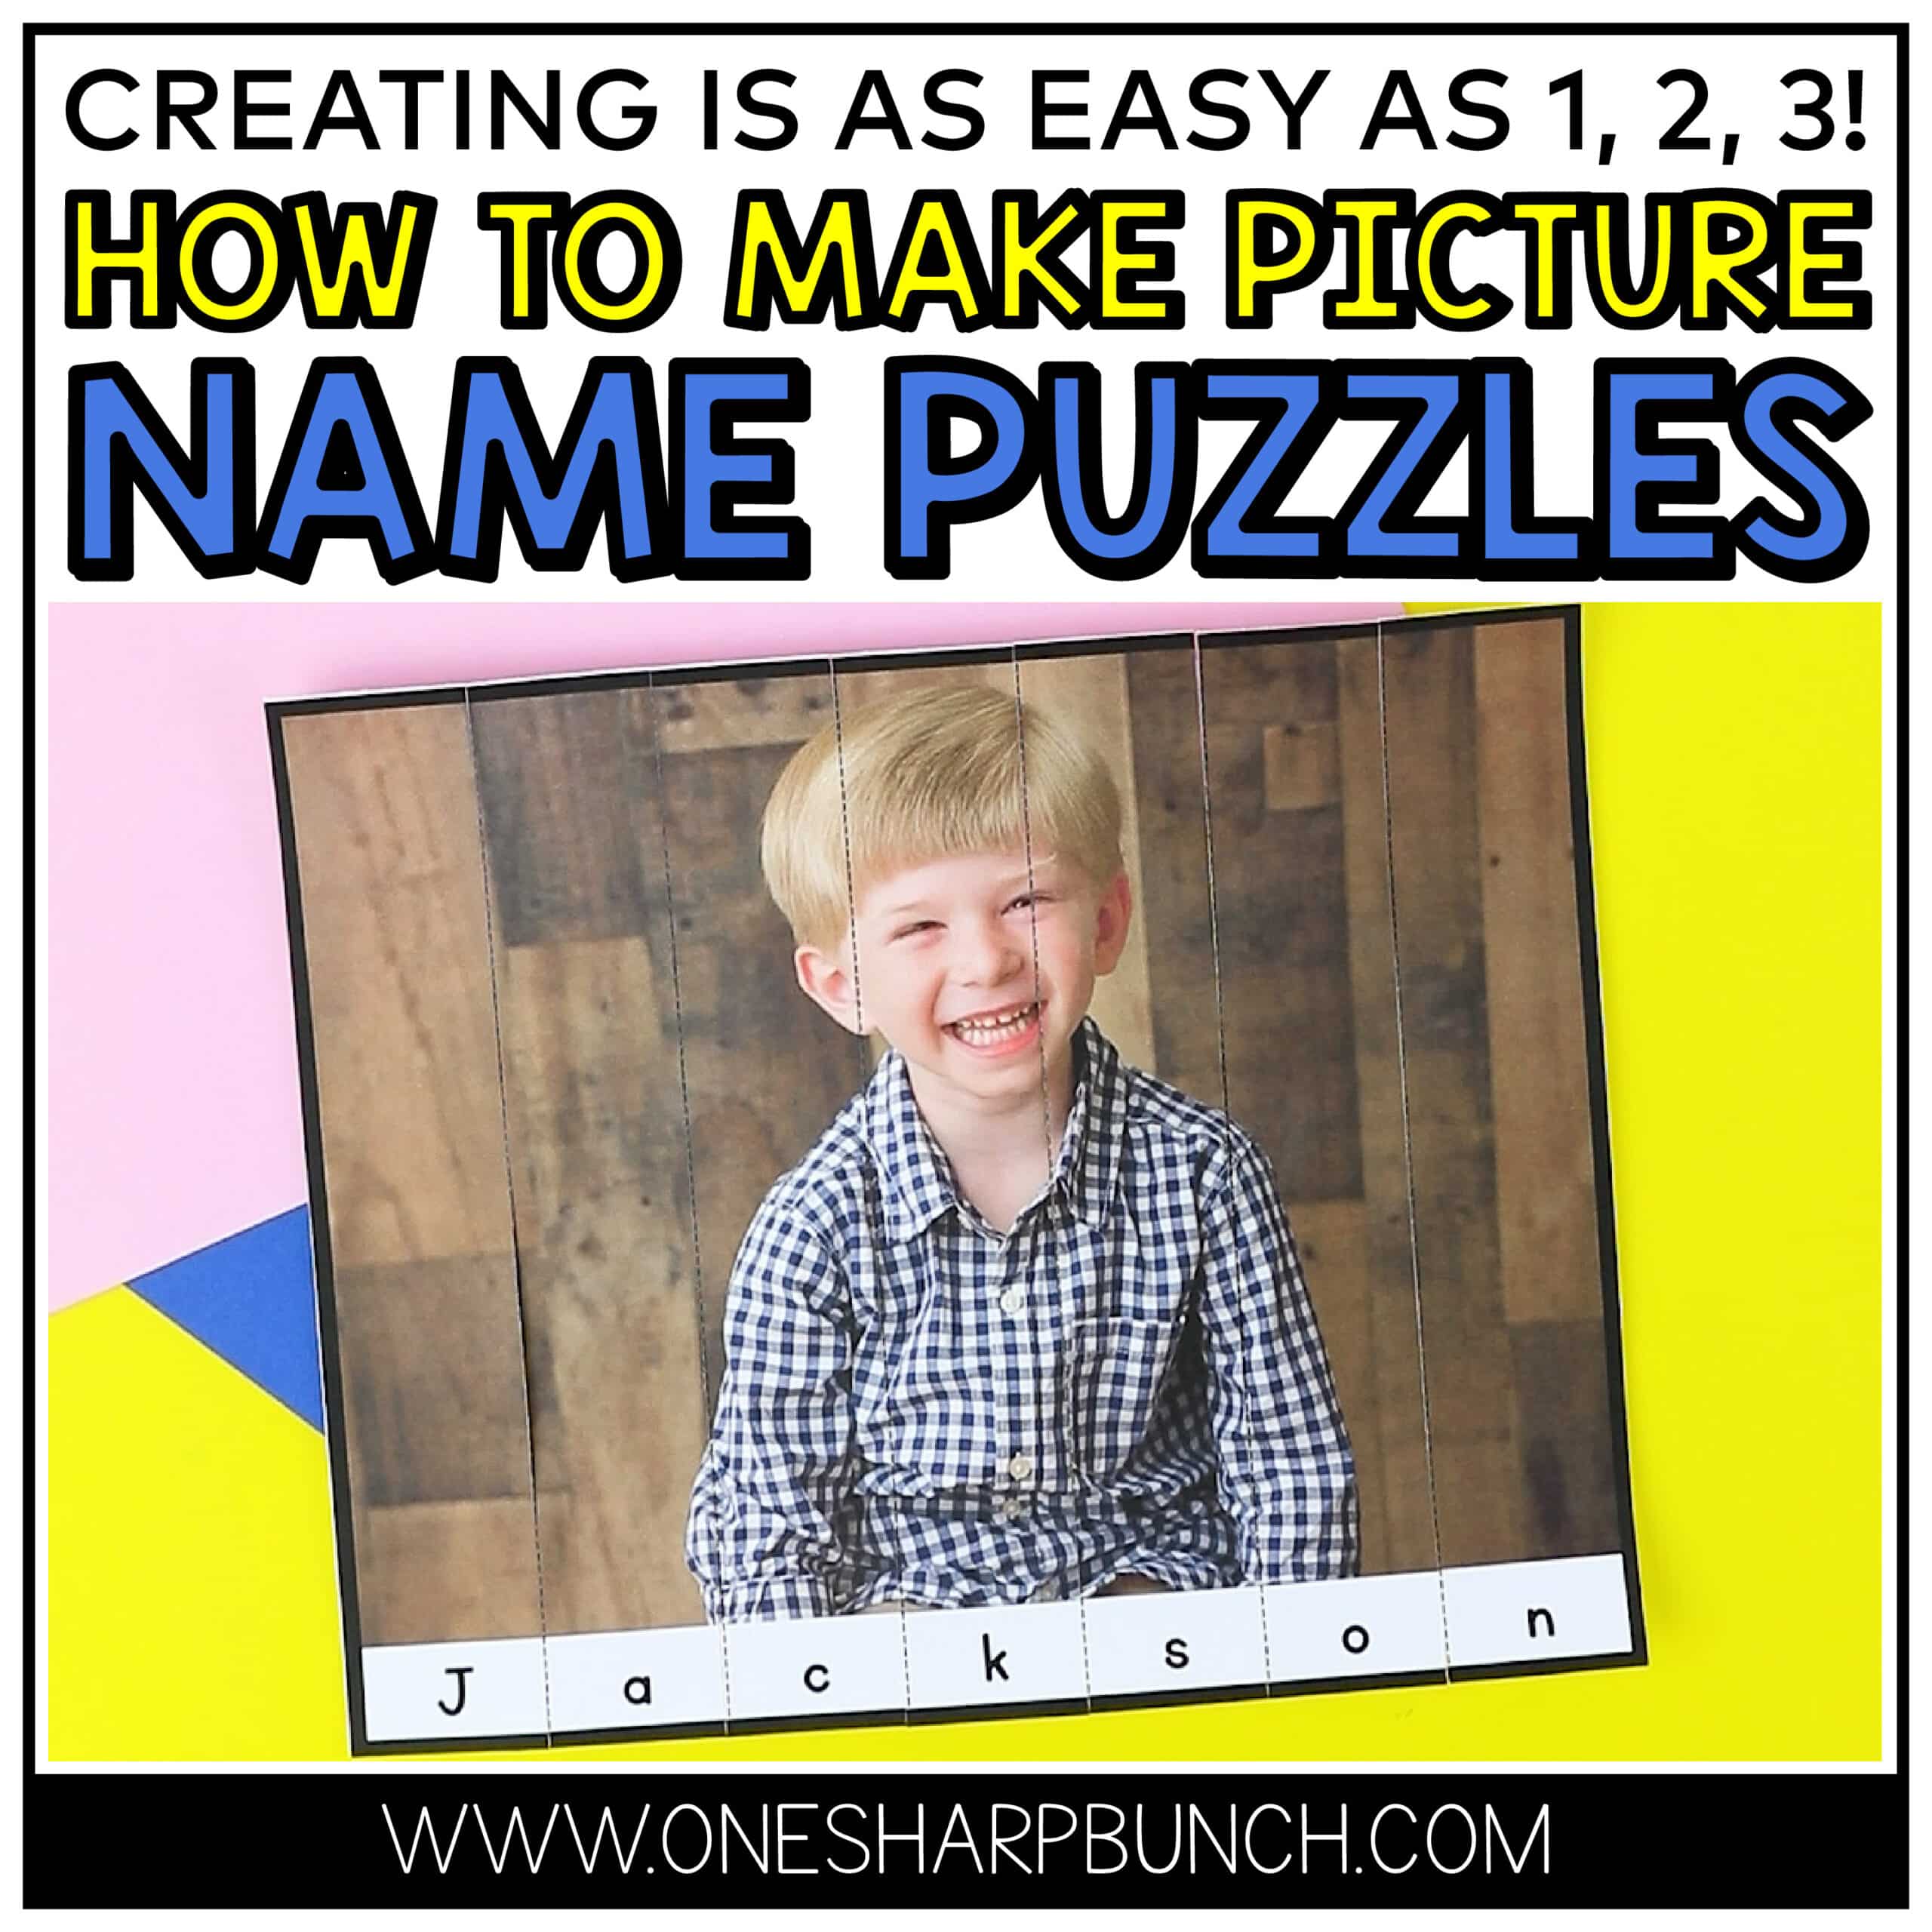 Name puzzles are a great way for preschool and kindergarten students to practice spelling, writing and recognizing their name! This name practice activity is perfect for back to school. Plus, creating these picture name puzzles is as easy as 1, 2, 3! Pair this name activity with your favorite picture name books. Rather than using name practice sheets, use these name puzzles to strengthen fine motor skills. This name activity for preschool is perfect for centers, morning work or early finishers!